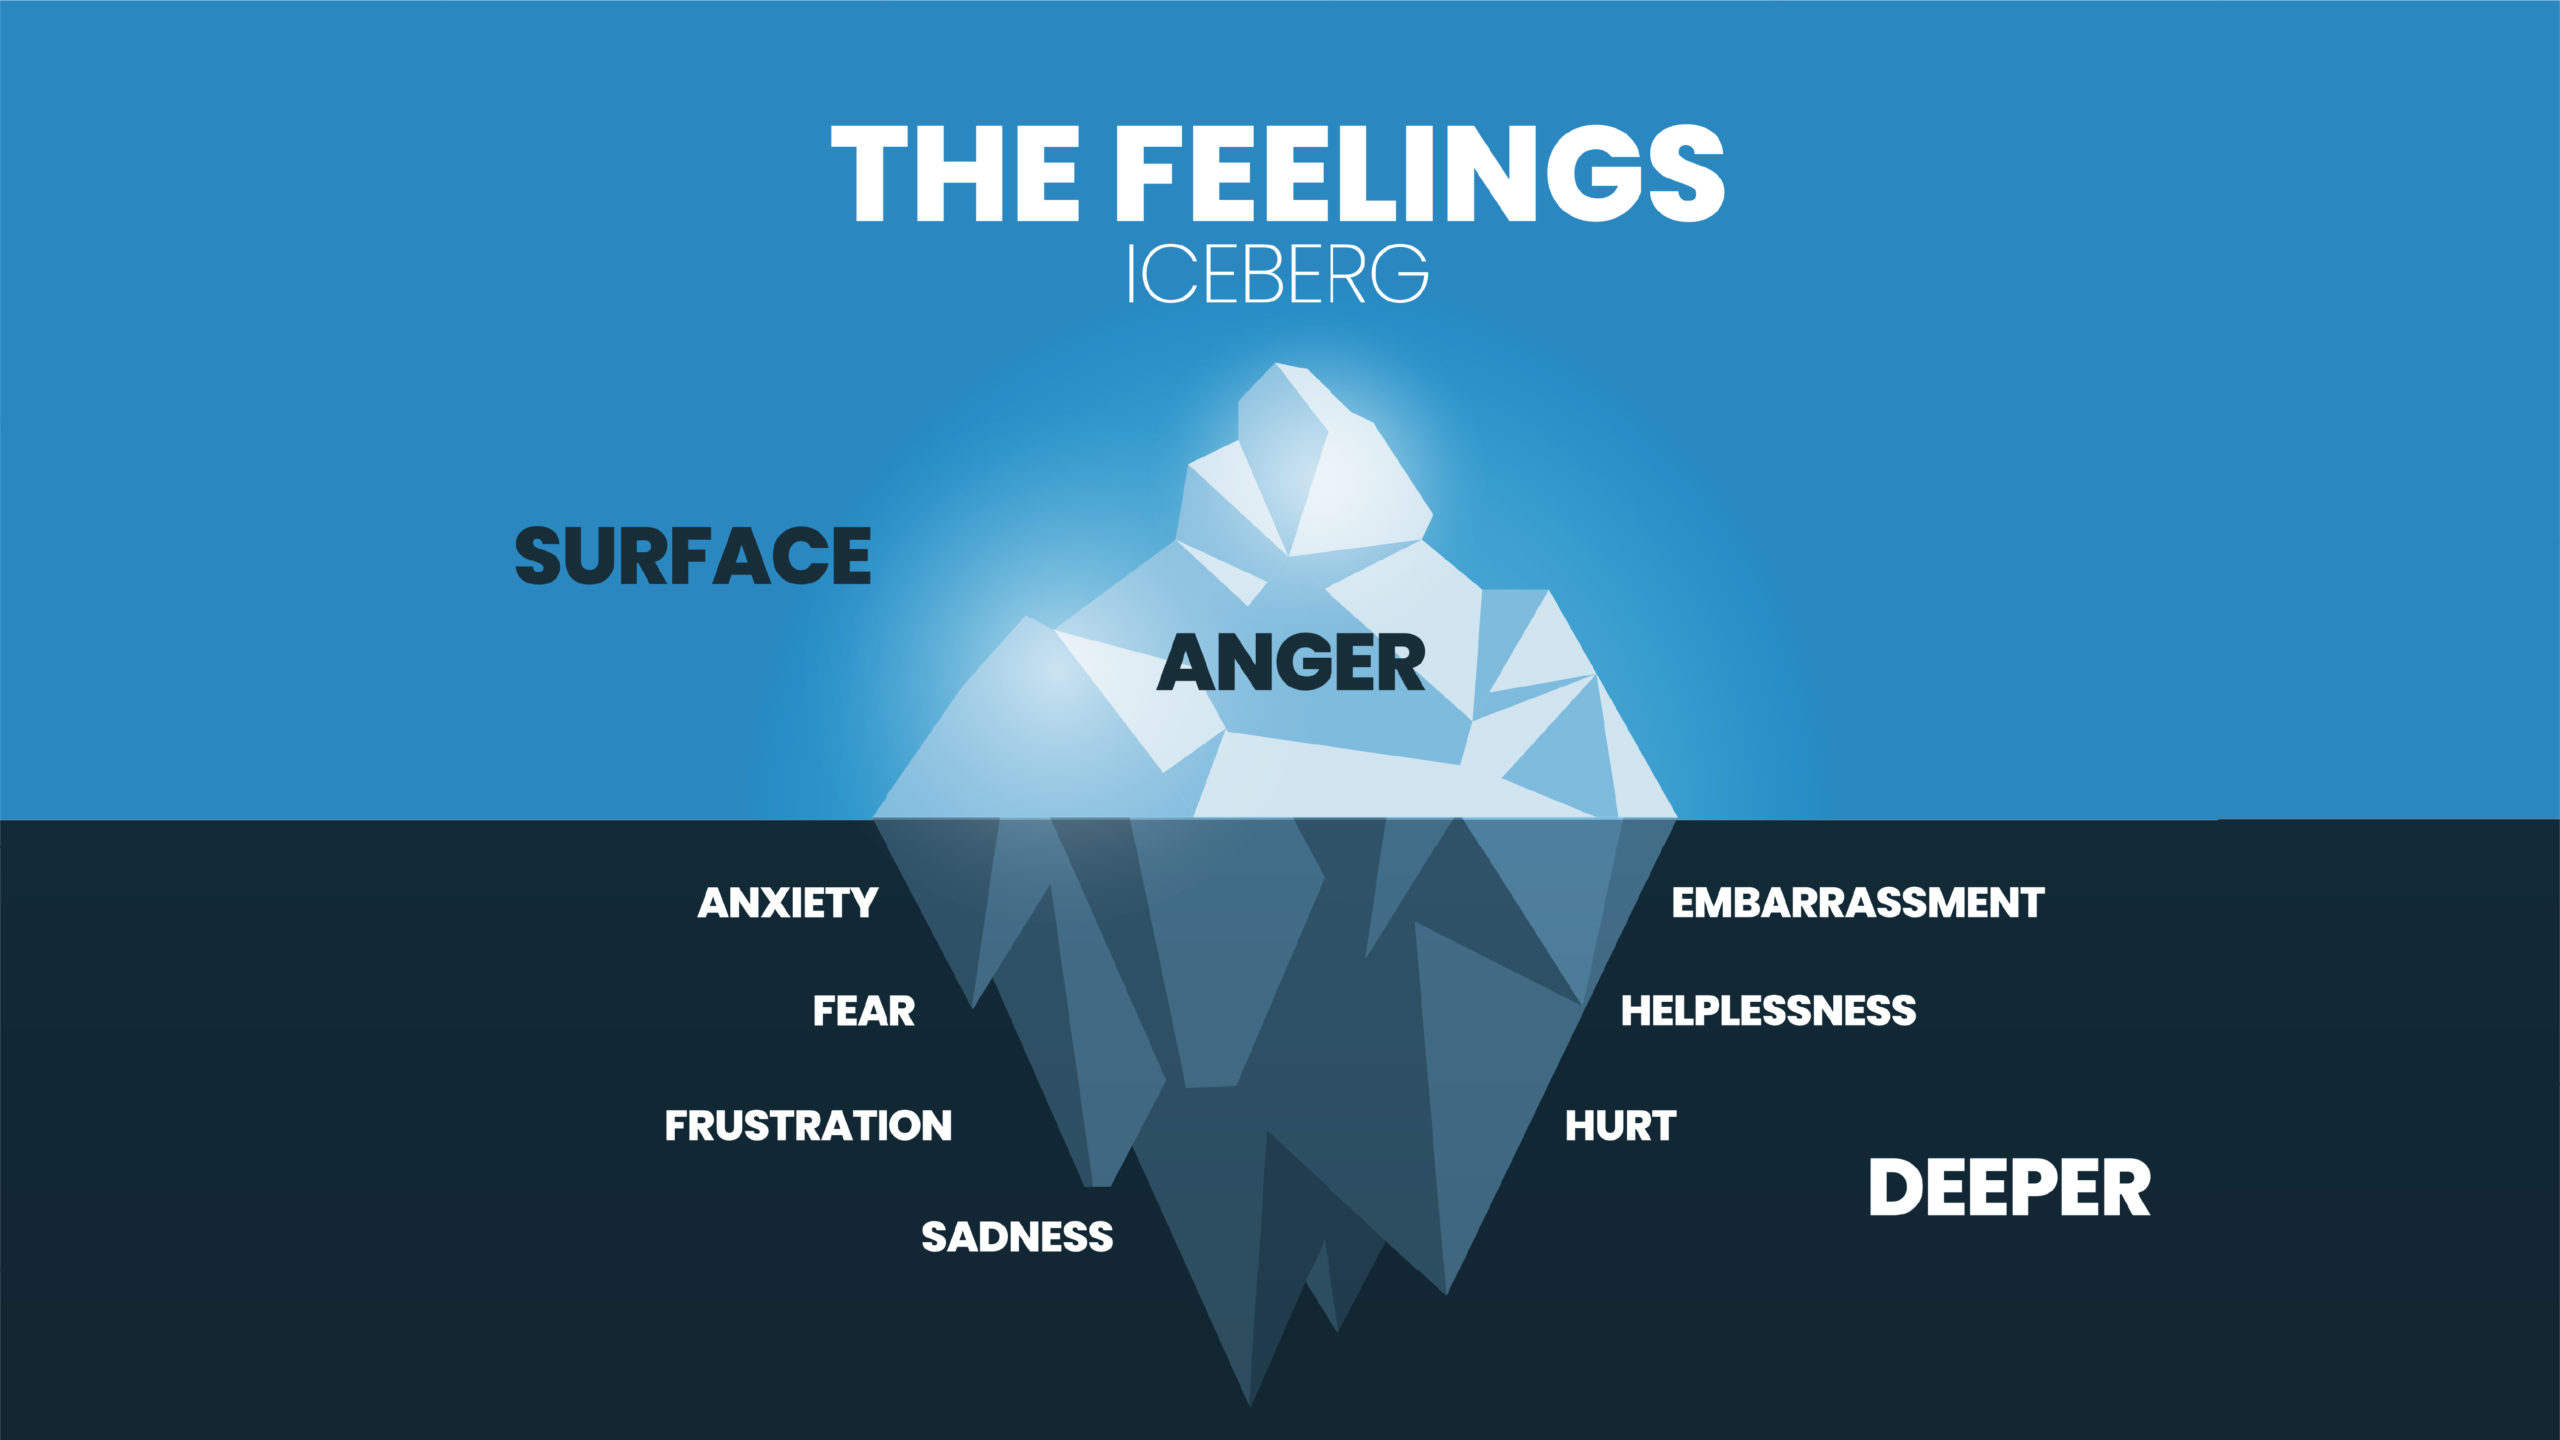 The feeling hidden iceberg model infographic vector has 2 skill level, surface is Anger, deeper is negative emotions like fear, anxiety, frustration, sadness, hurt, embarrassment, helplessness, pain.